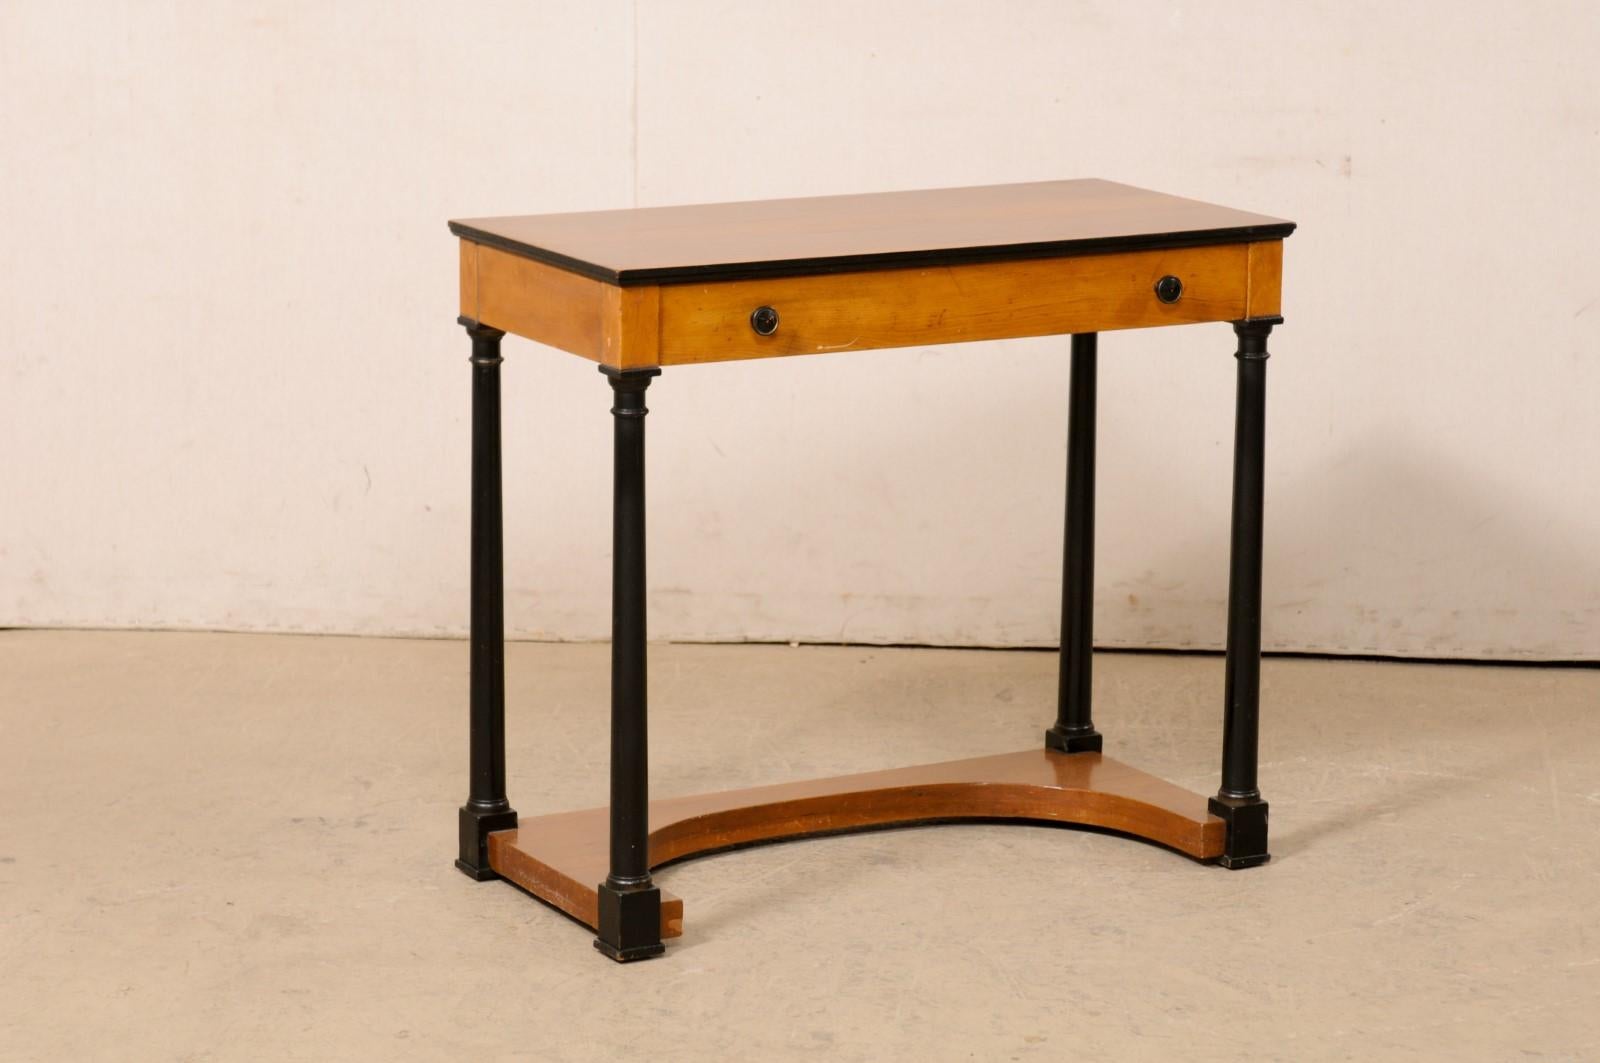 A Swedish small-sized wooden console table with drawer from the 19th century. This antique table from Sweden has a rectangular-shaped top (approximately 2.75 feet in length) with sits atop an apron that houses a single door which spans the width of